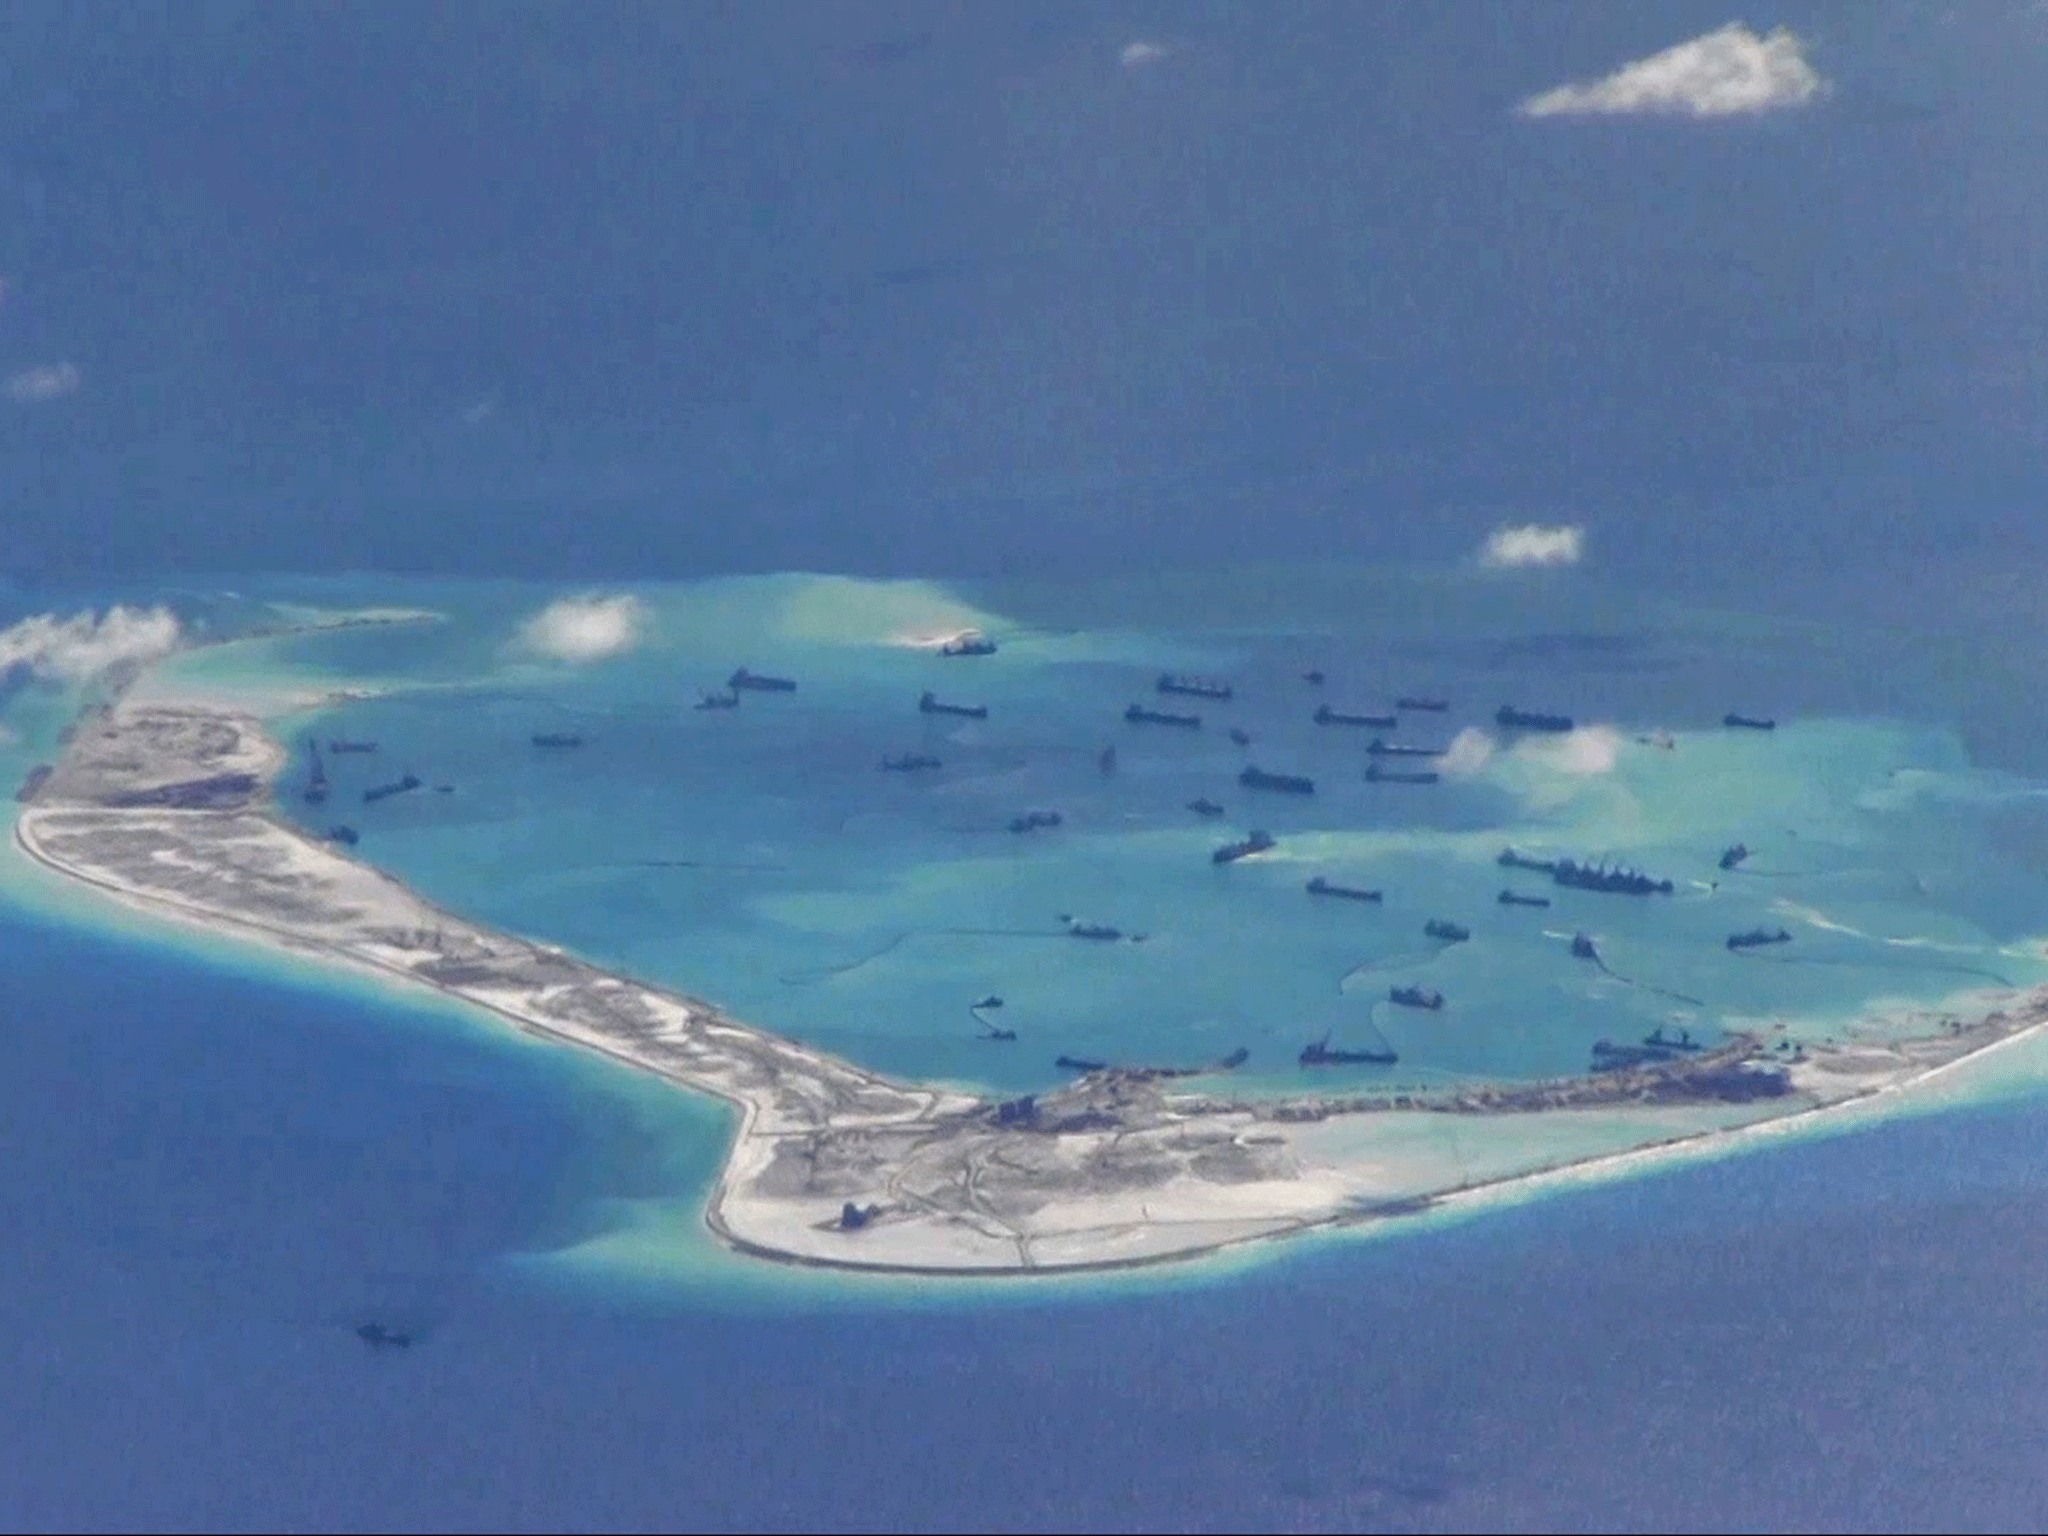 Land around the Spratly Islands in the South China Sea has been reclaimed using dredging